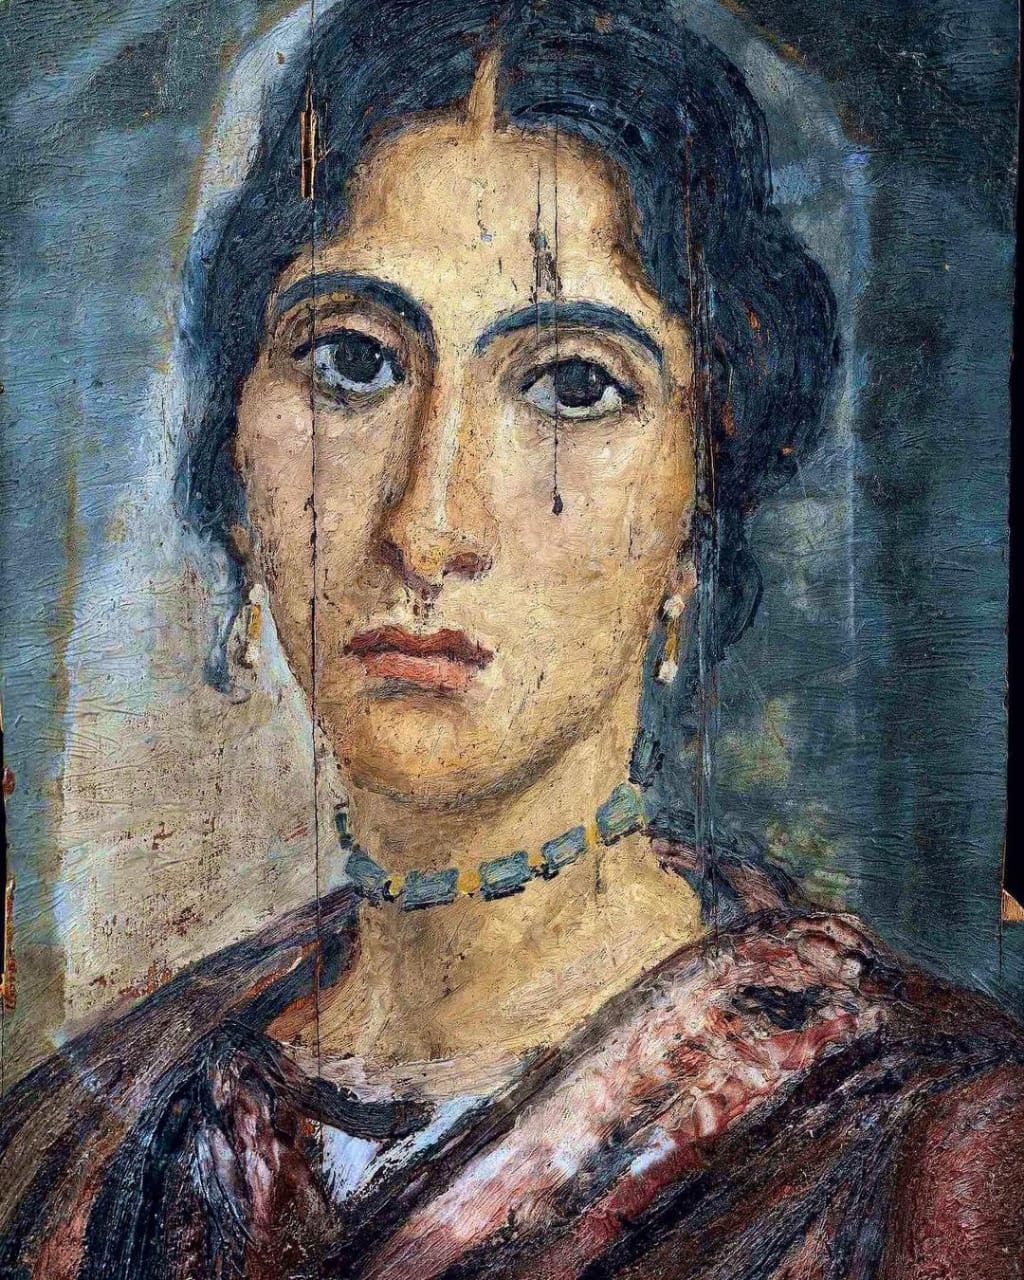 mummy portrait of an egyptian woman 50 bc wearing greek clothes